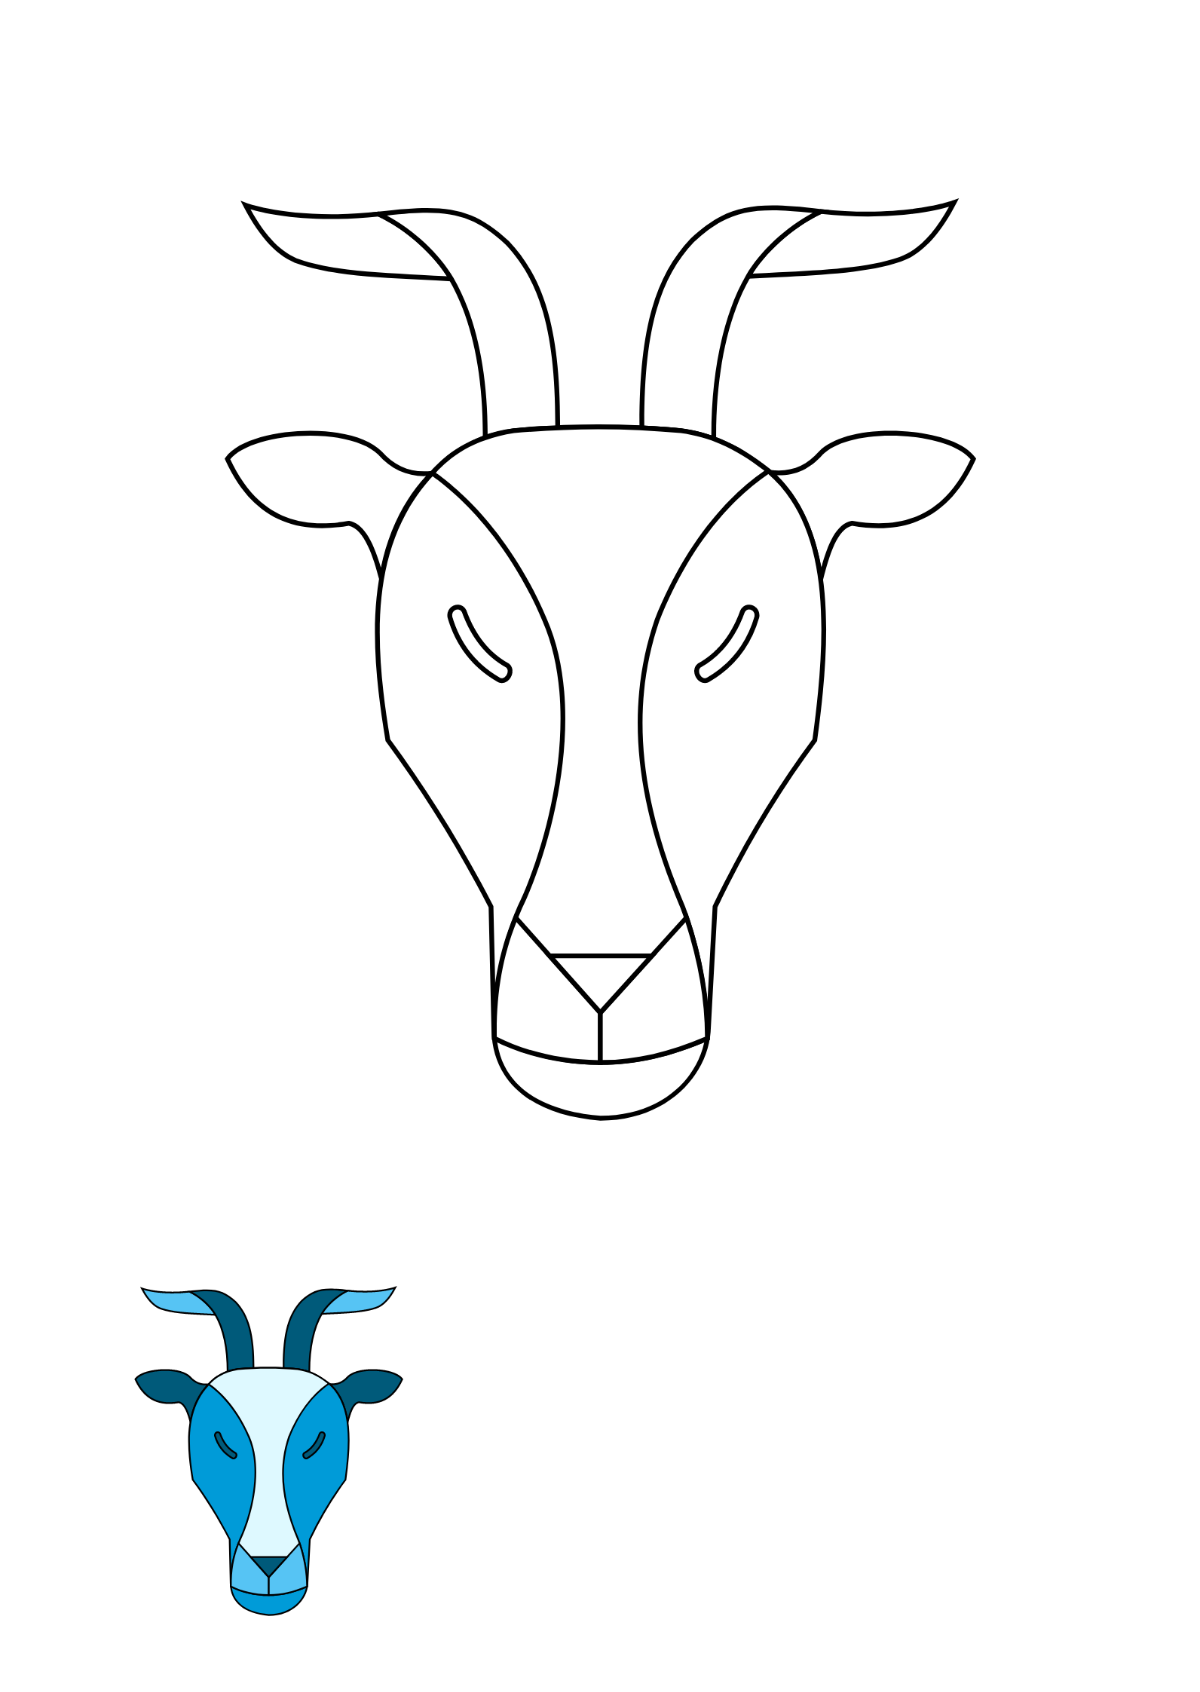 Capricorn Sign coloring page Template